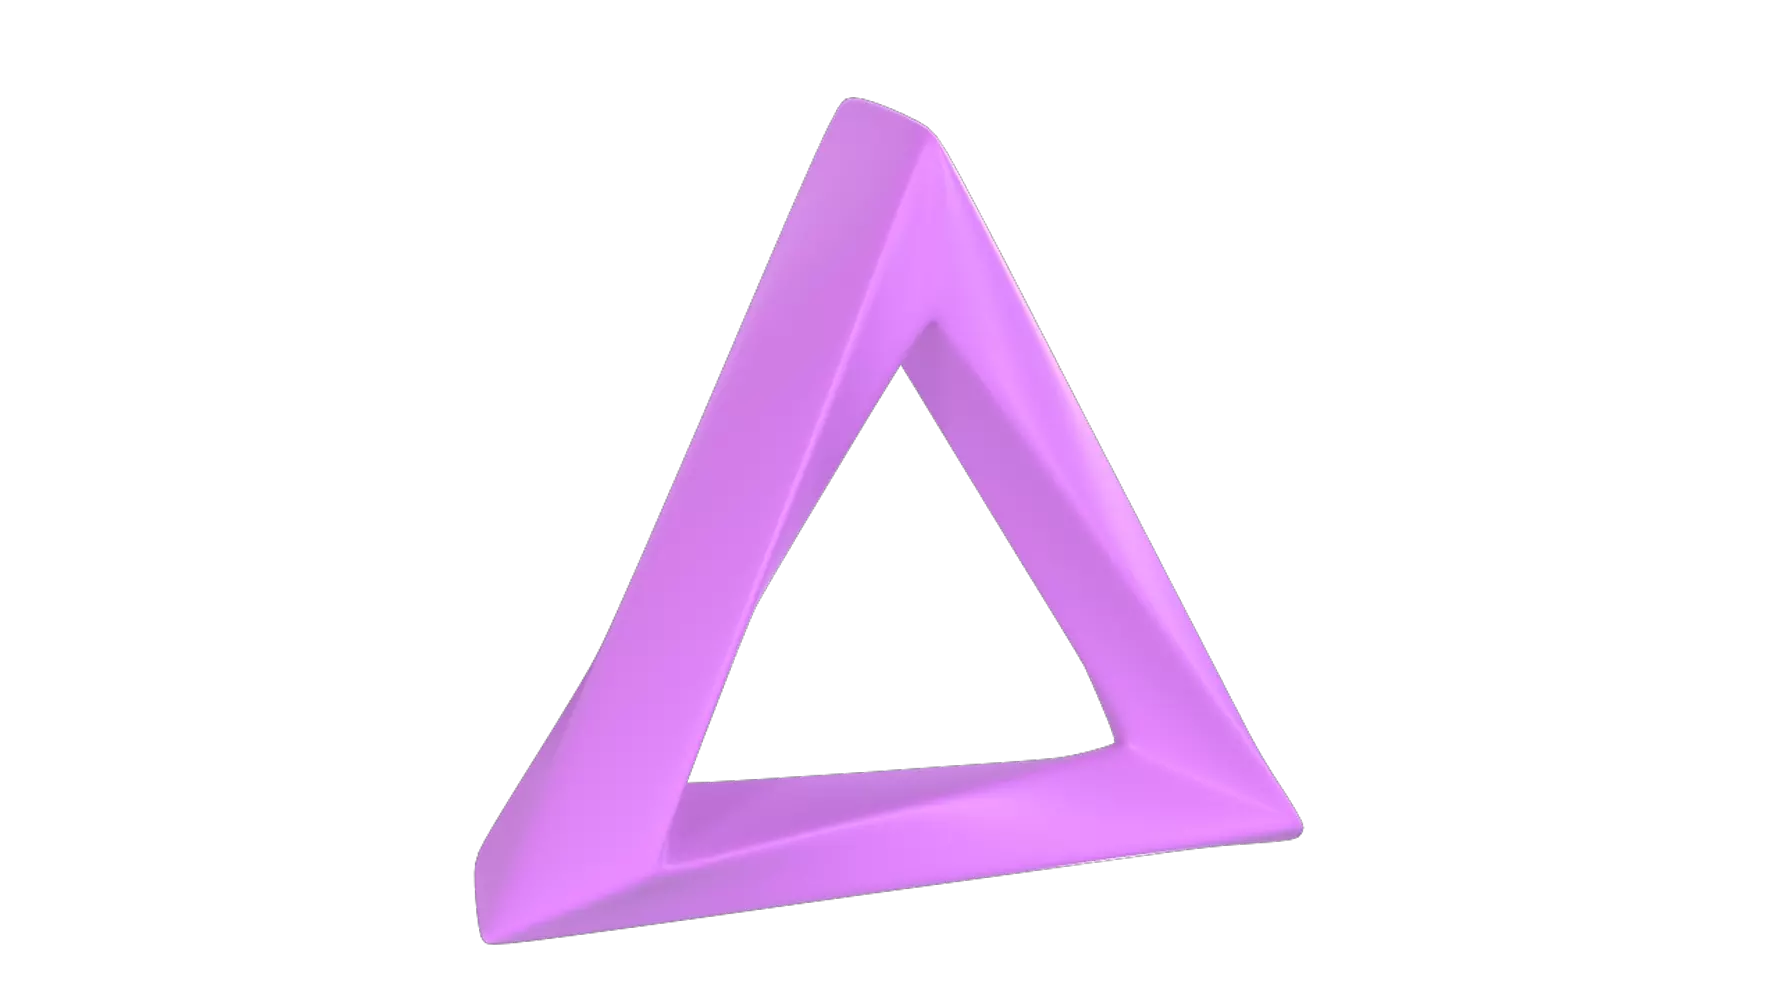 Abstract Triangle 3D Graphic